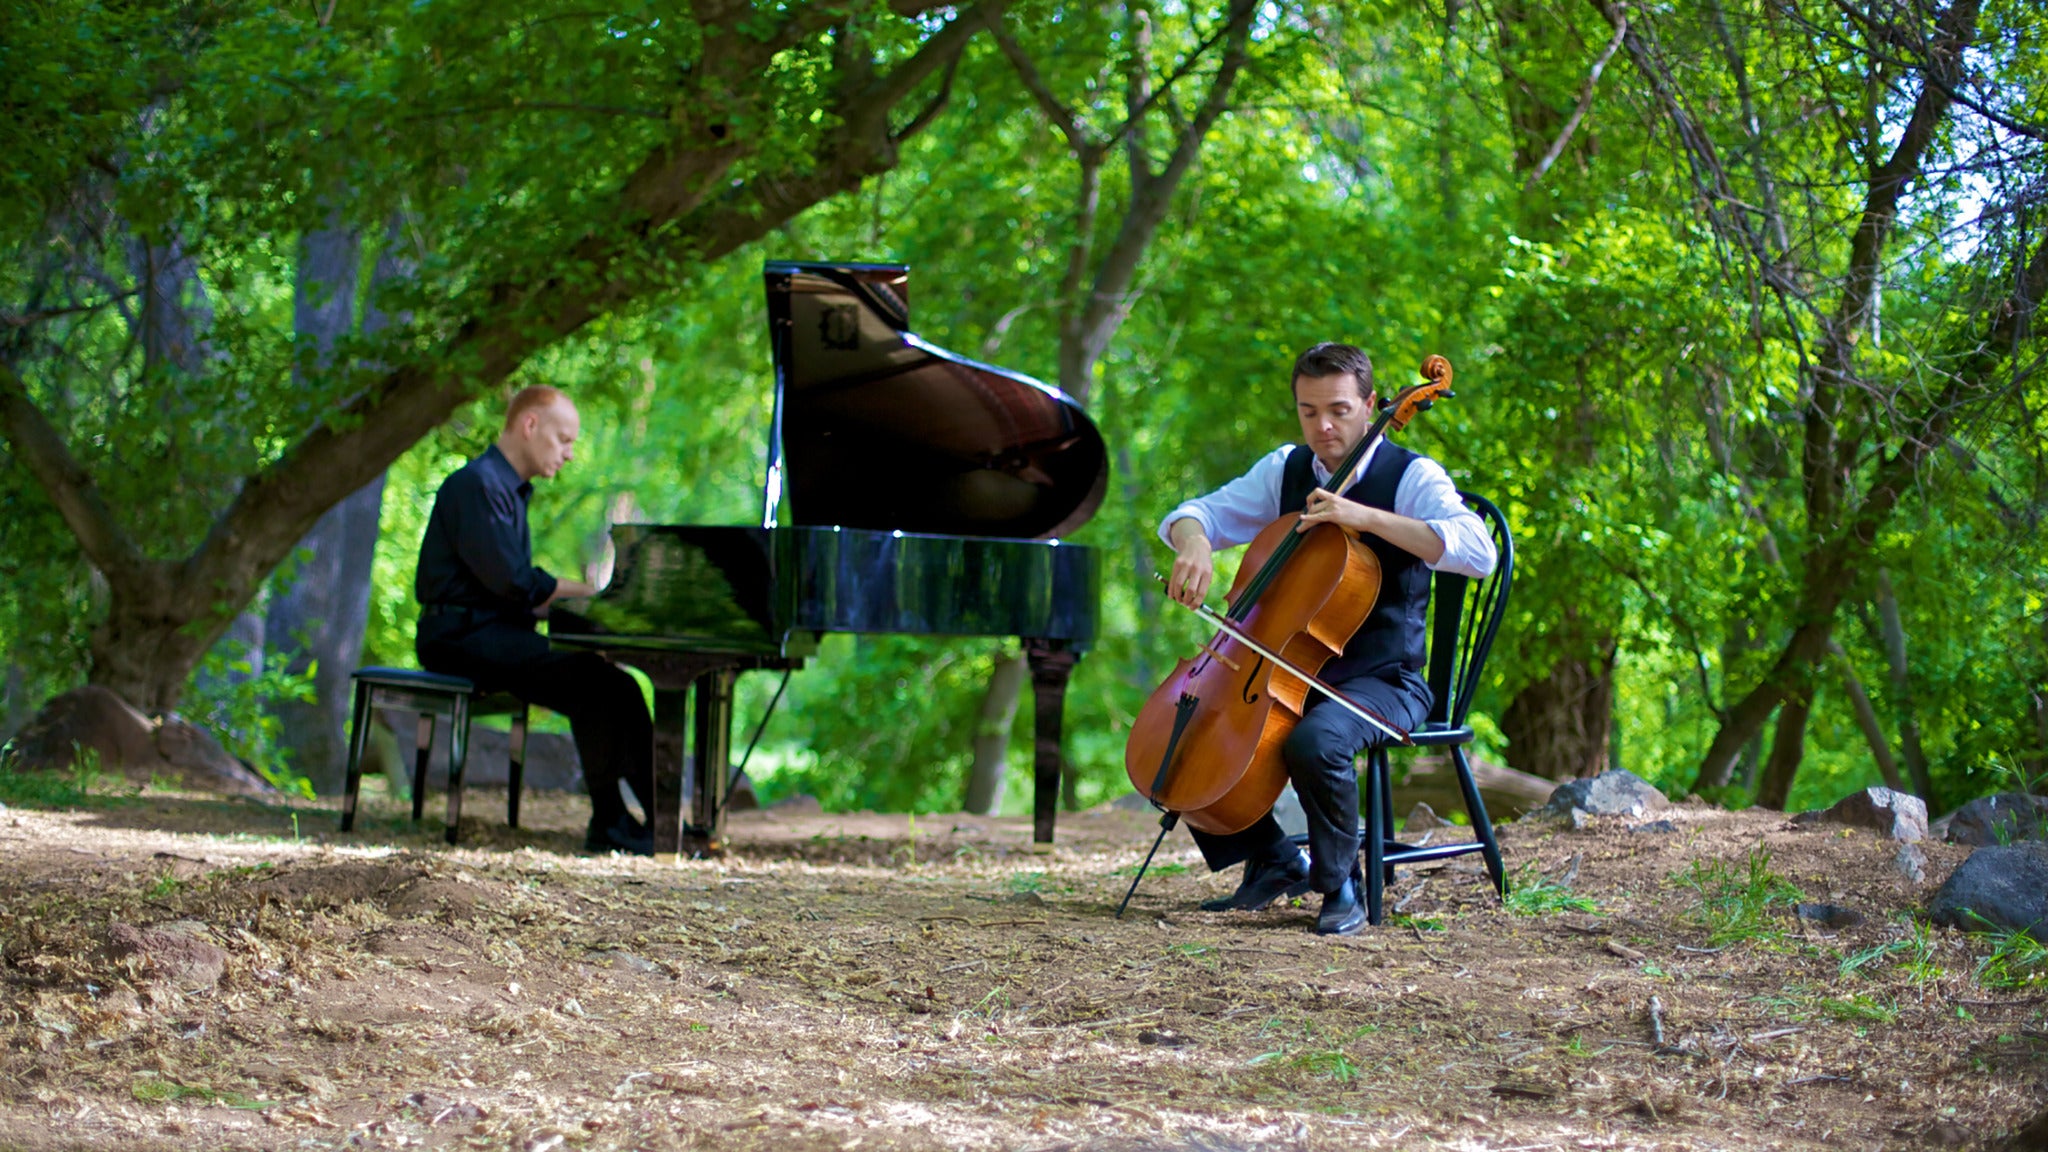 The Piano Guys at Buell Theatre